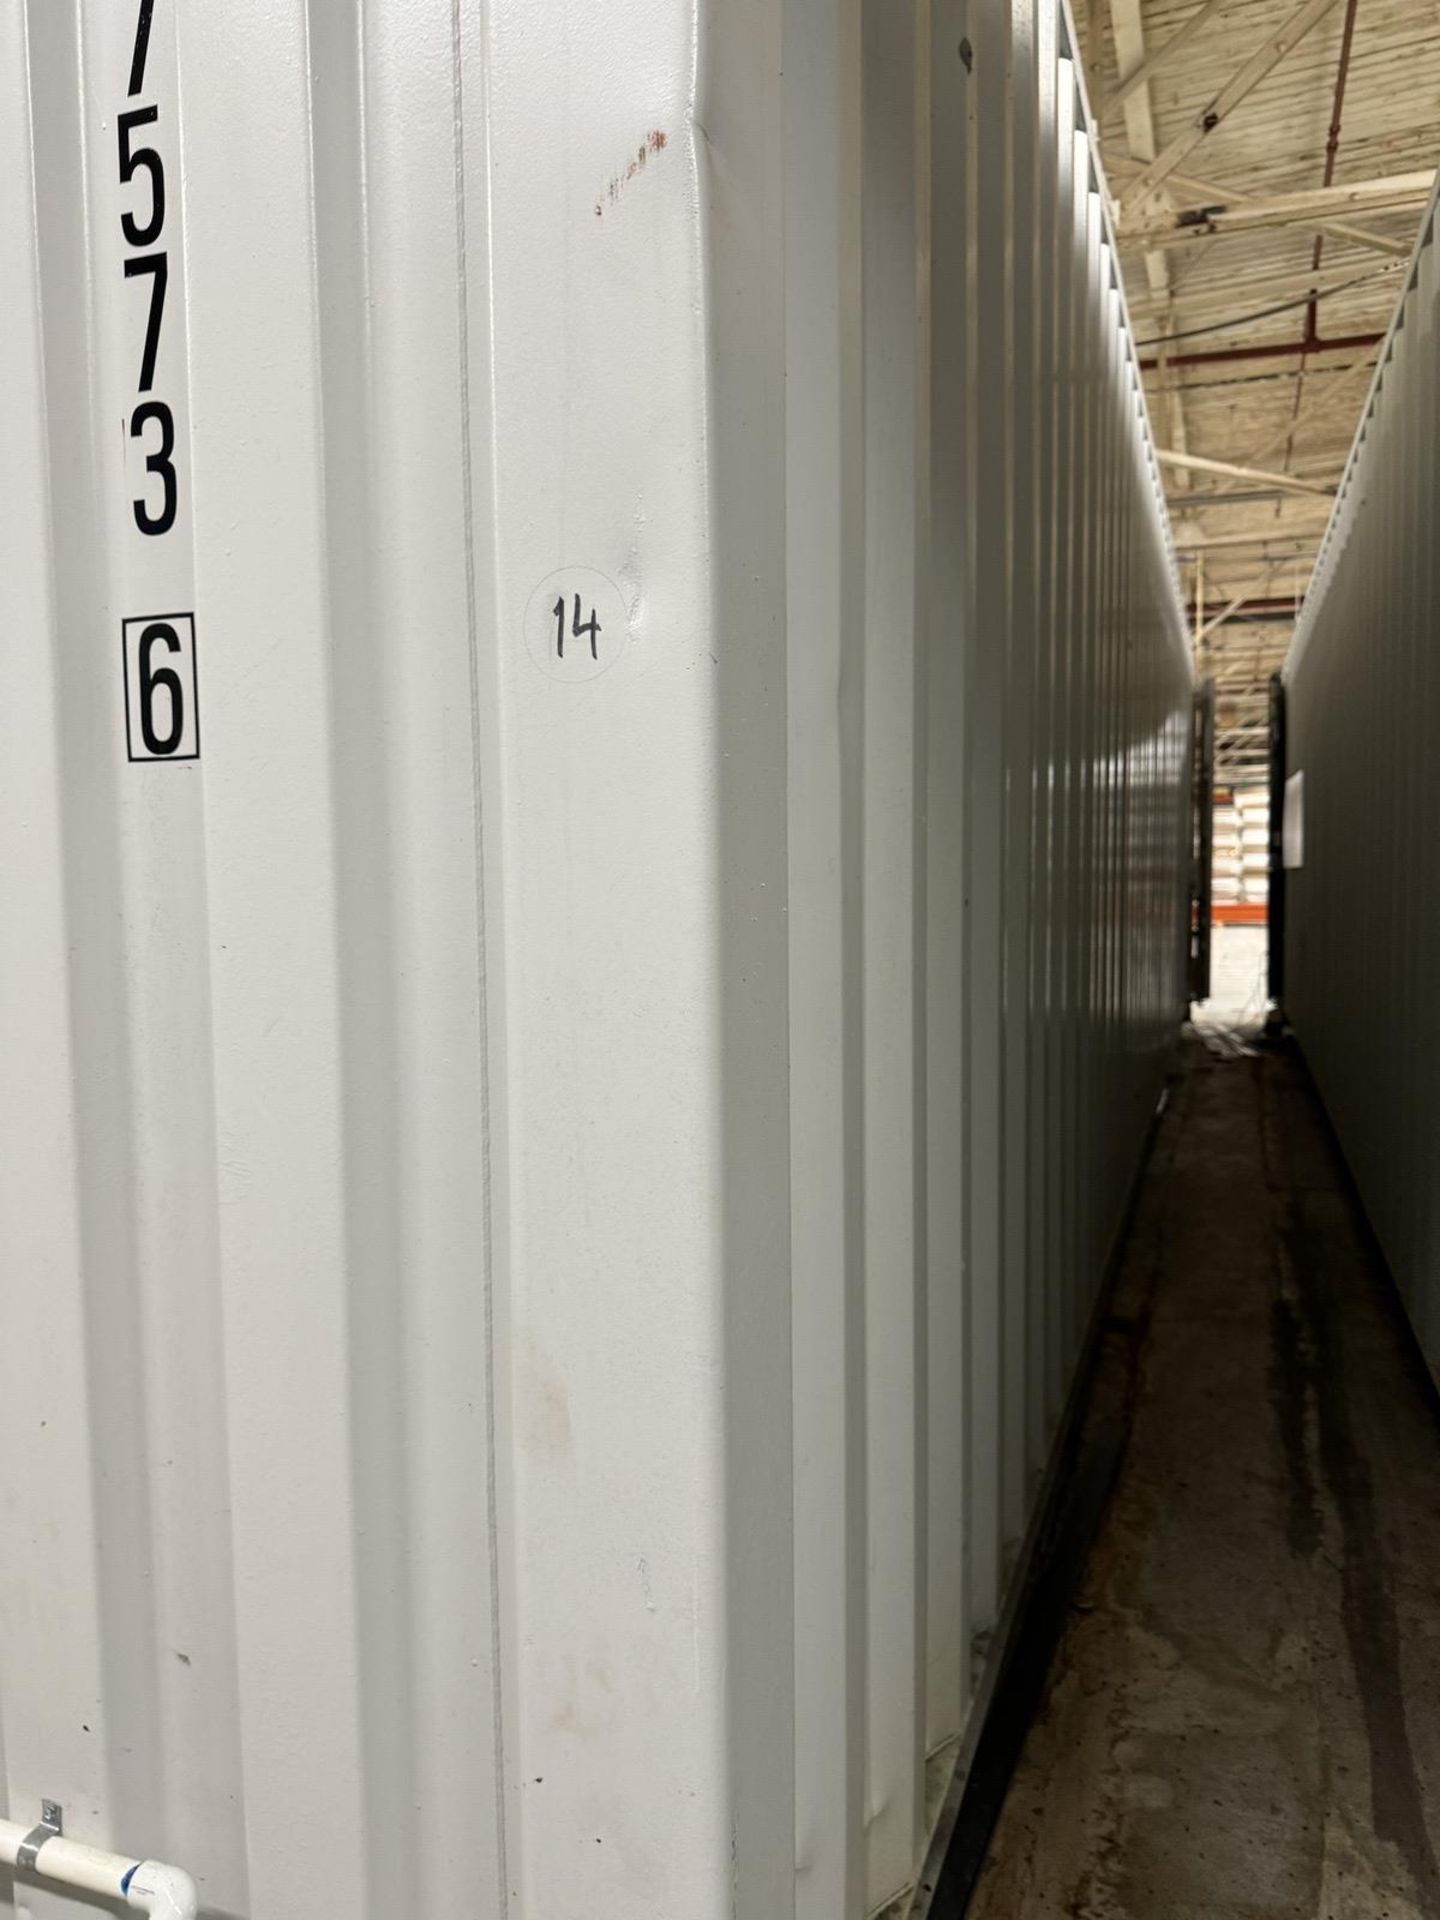 40' x 8' Customized Vertical Farming Container Including Double Door Entry, (2) 8.5' x 8' - Image 26 of 26